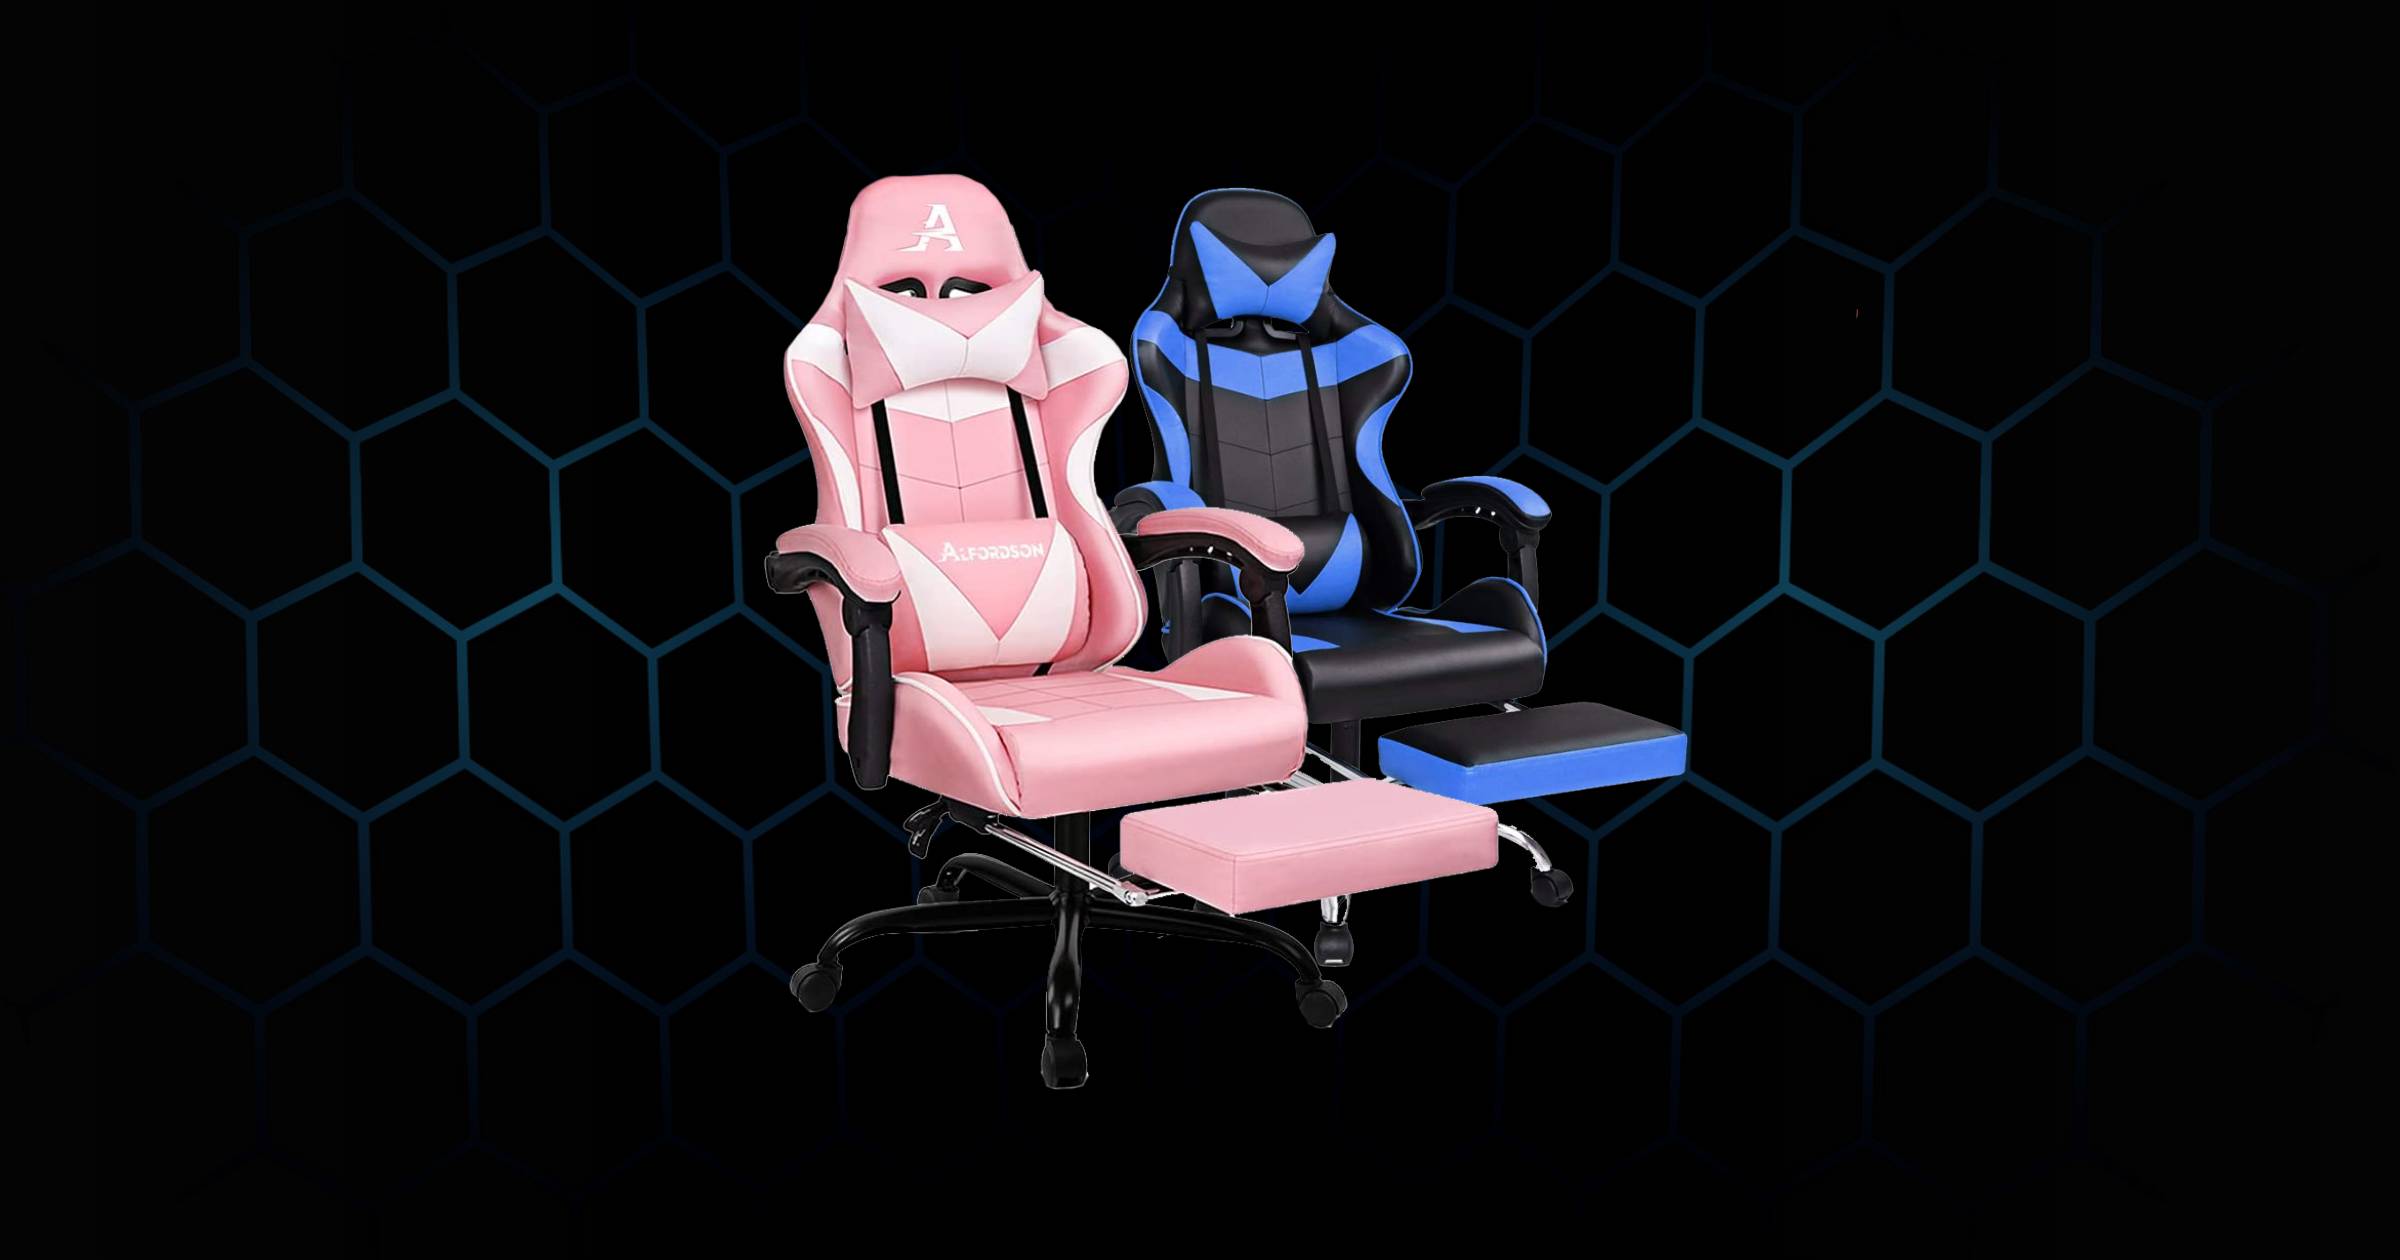 Results for xbox gaming chair